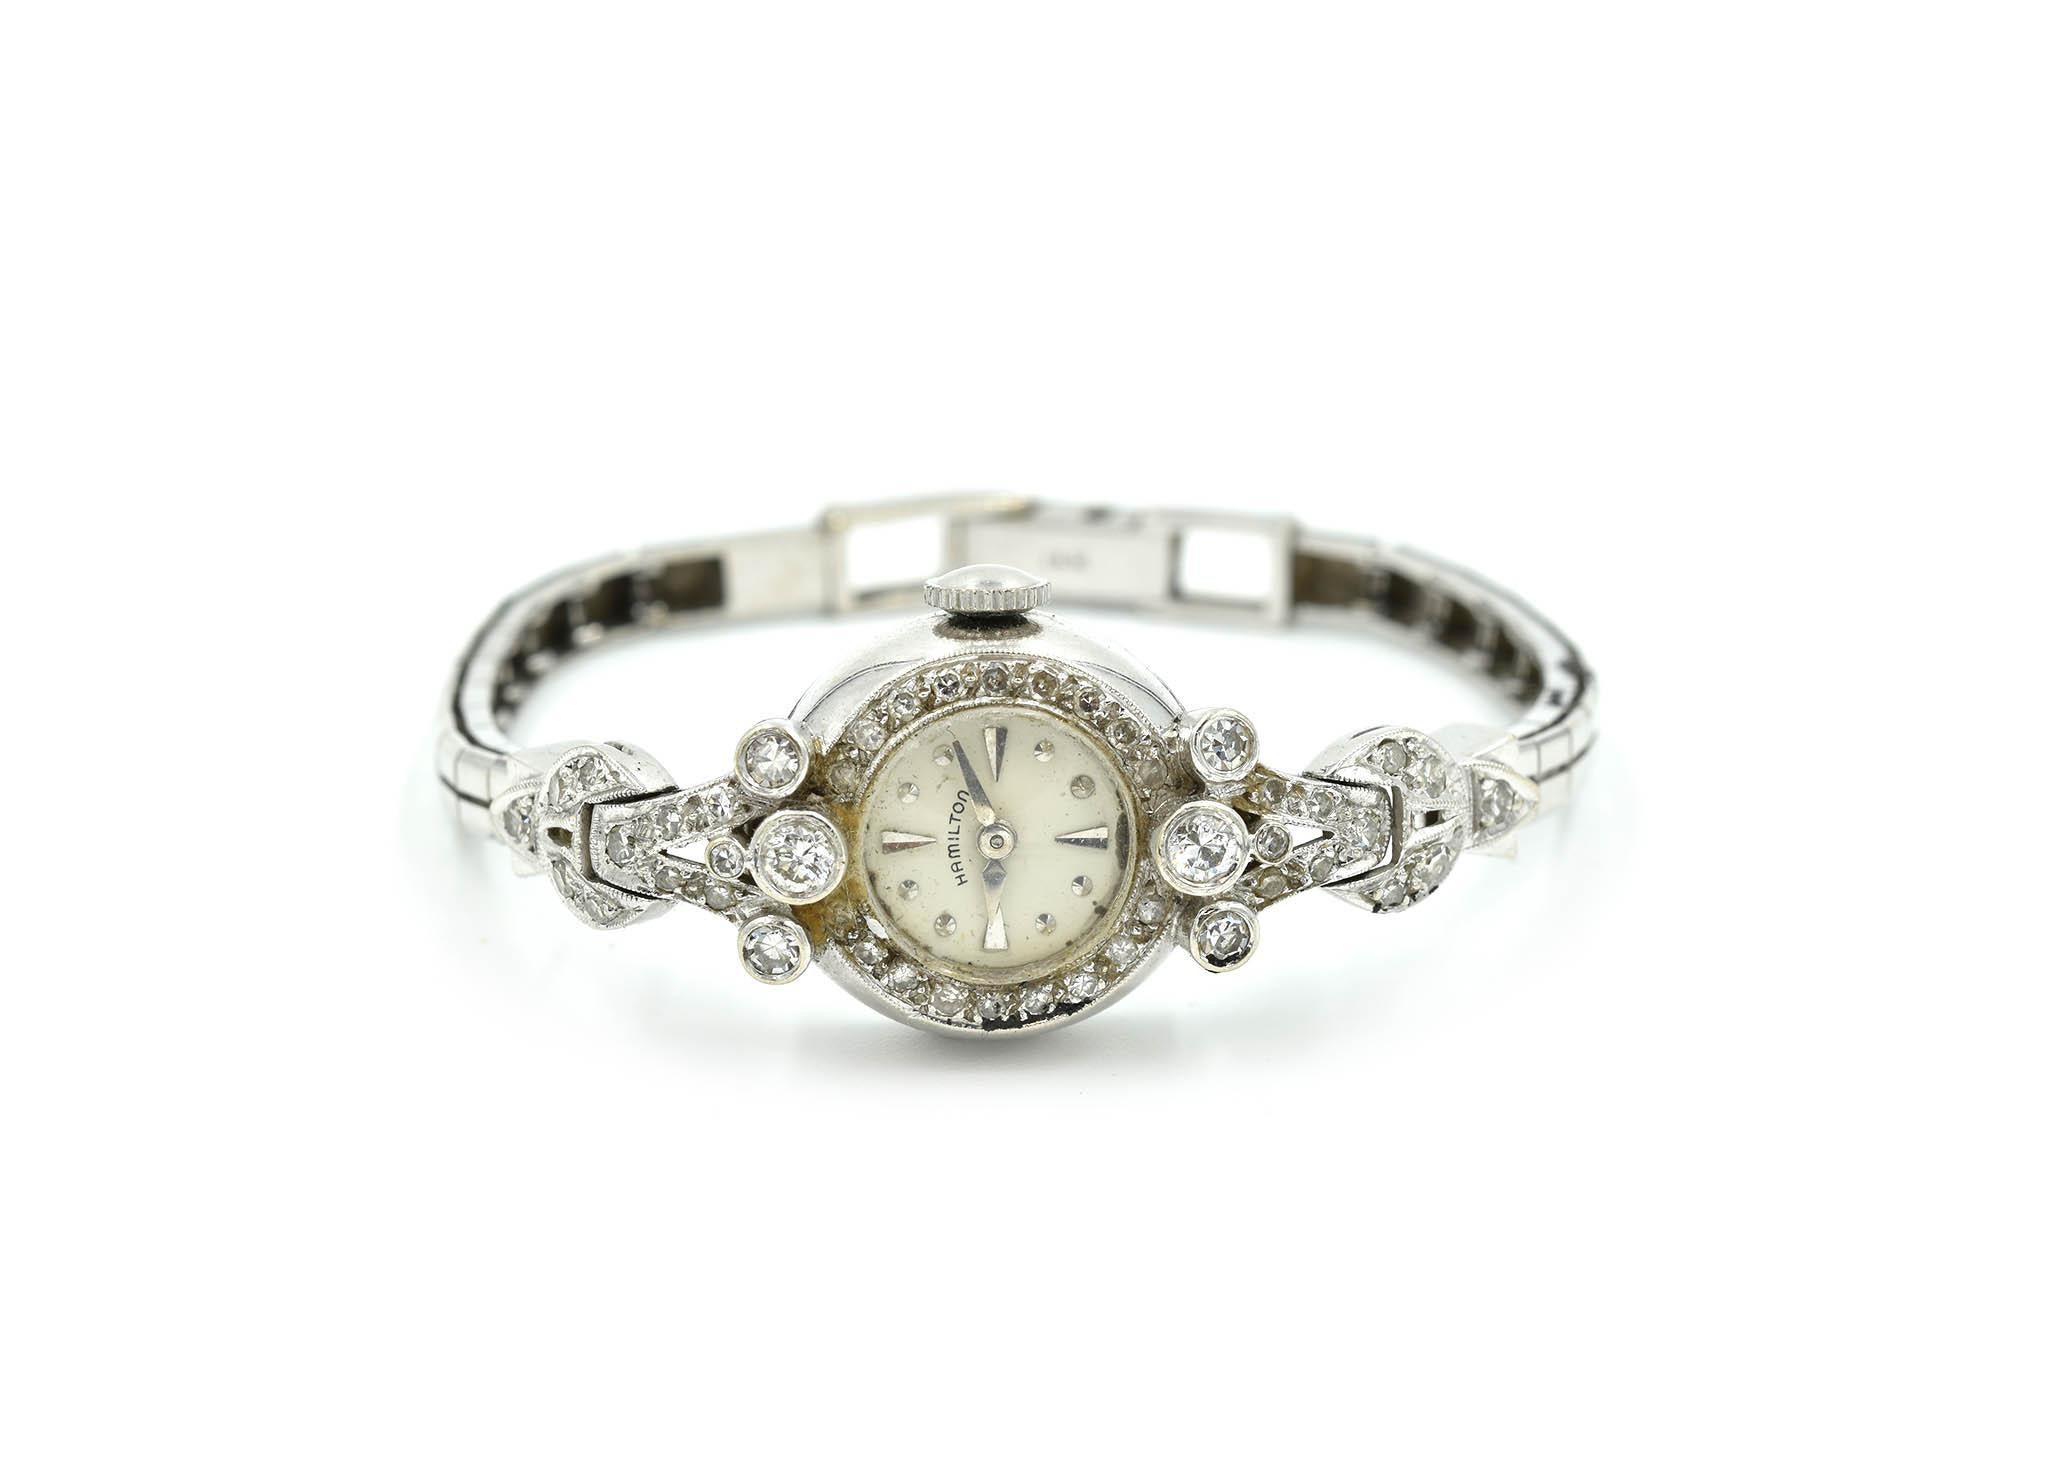 Movement: manual wind
Function: hours, minutes
Case: 16mm 14k white gold oval shaped case, round diamond case and lugs, glass protective crystal, pull/push crown, diamonds weigh 1.00 carats
Dial: white dial with silver hour markers, silver